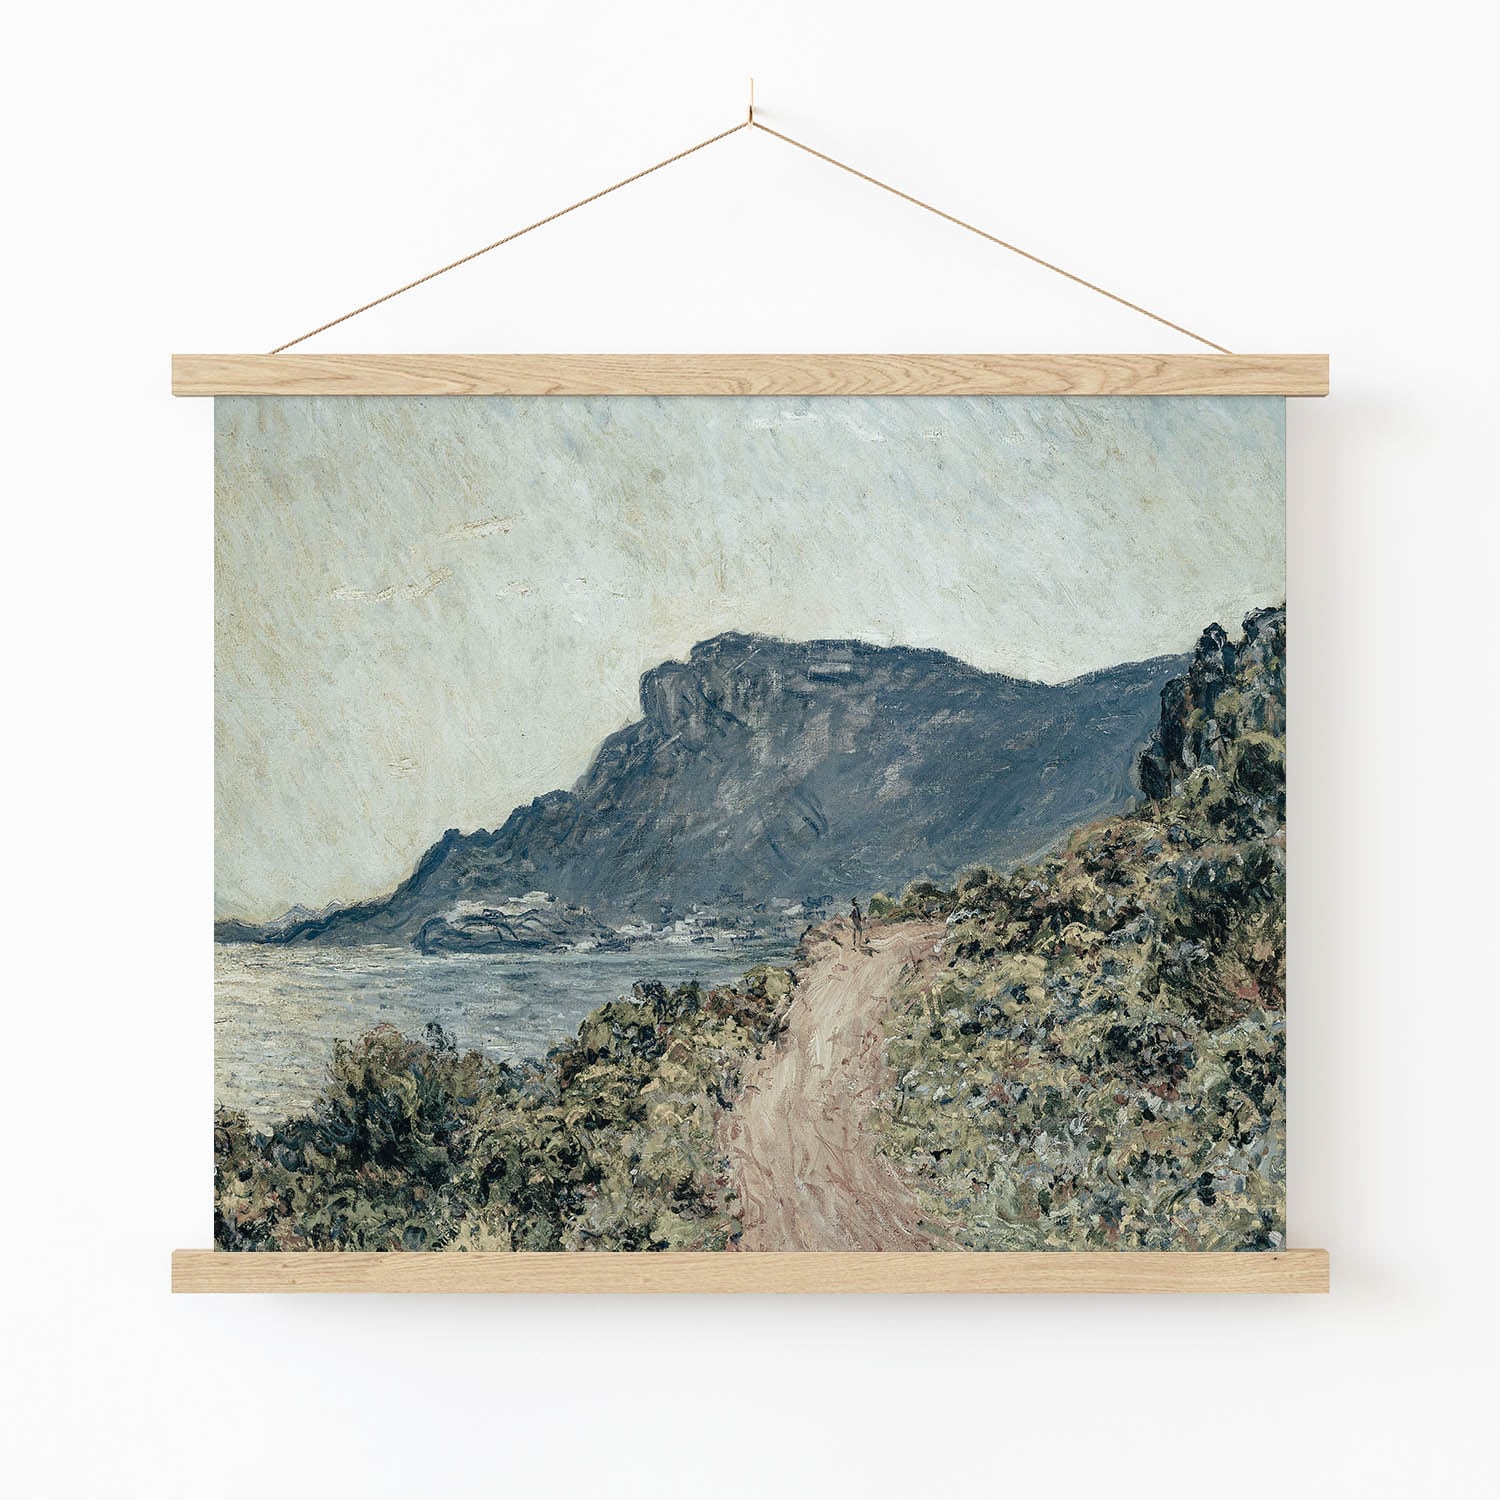 Pathway on the Seaside Art Print in Wood Hanger Frame on Wall